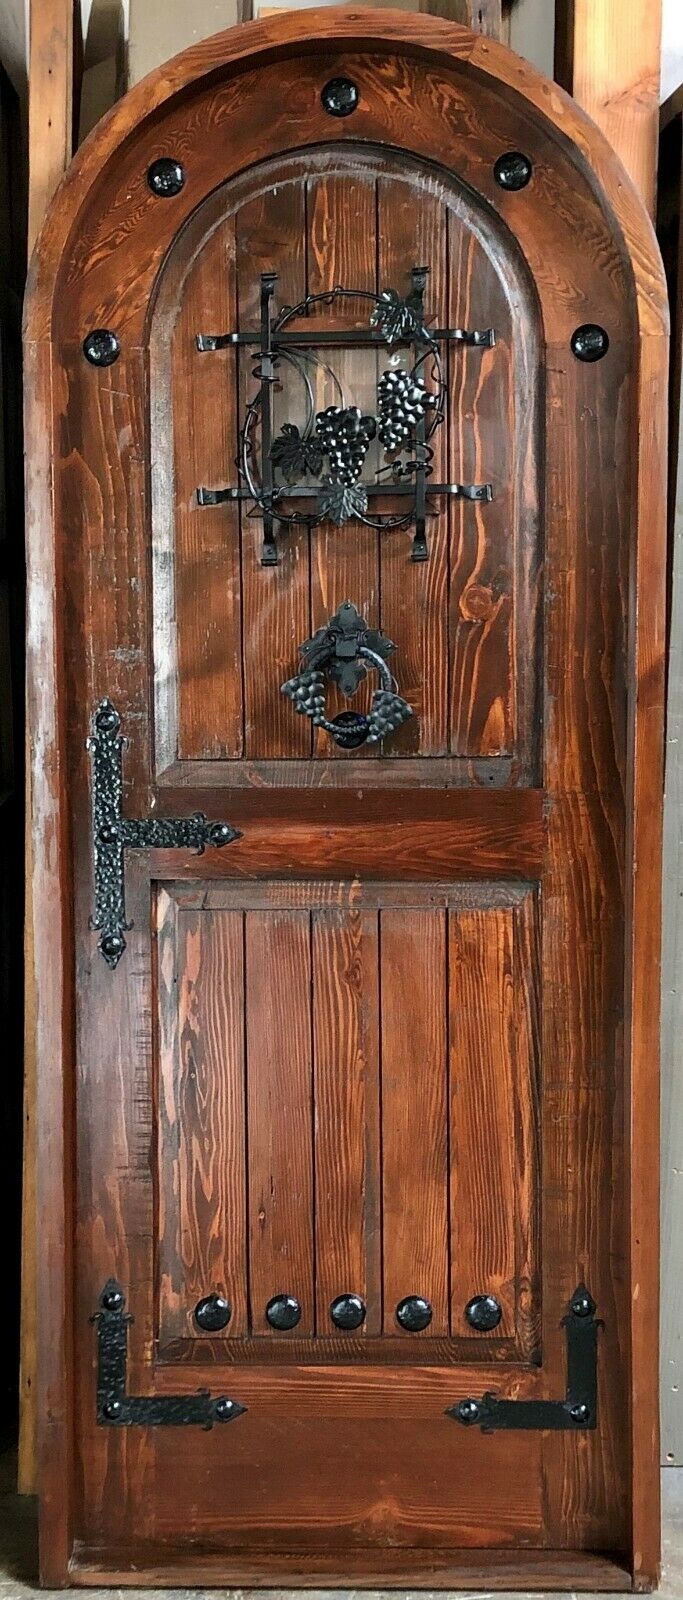 Rustic Reclaimed Lumber Arched Top Door Solid Wood Story Book Castle Winery